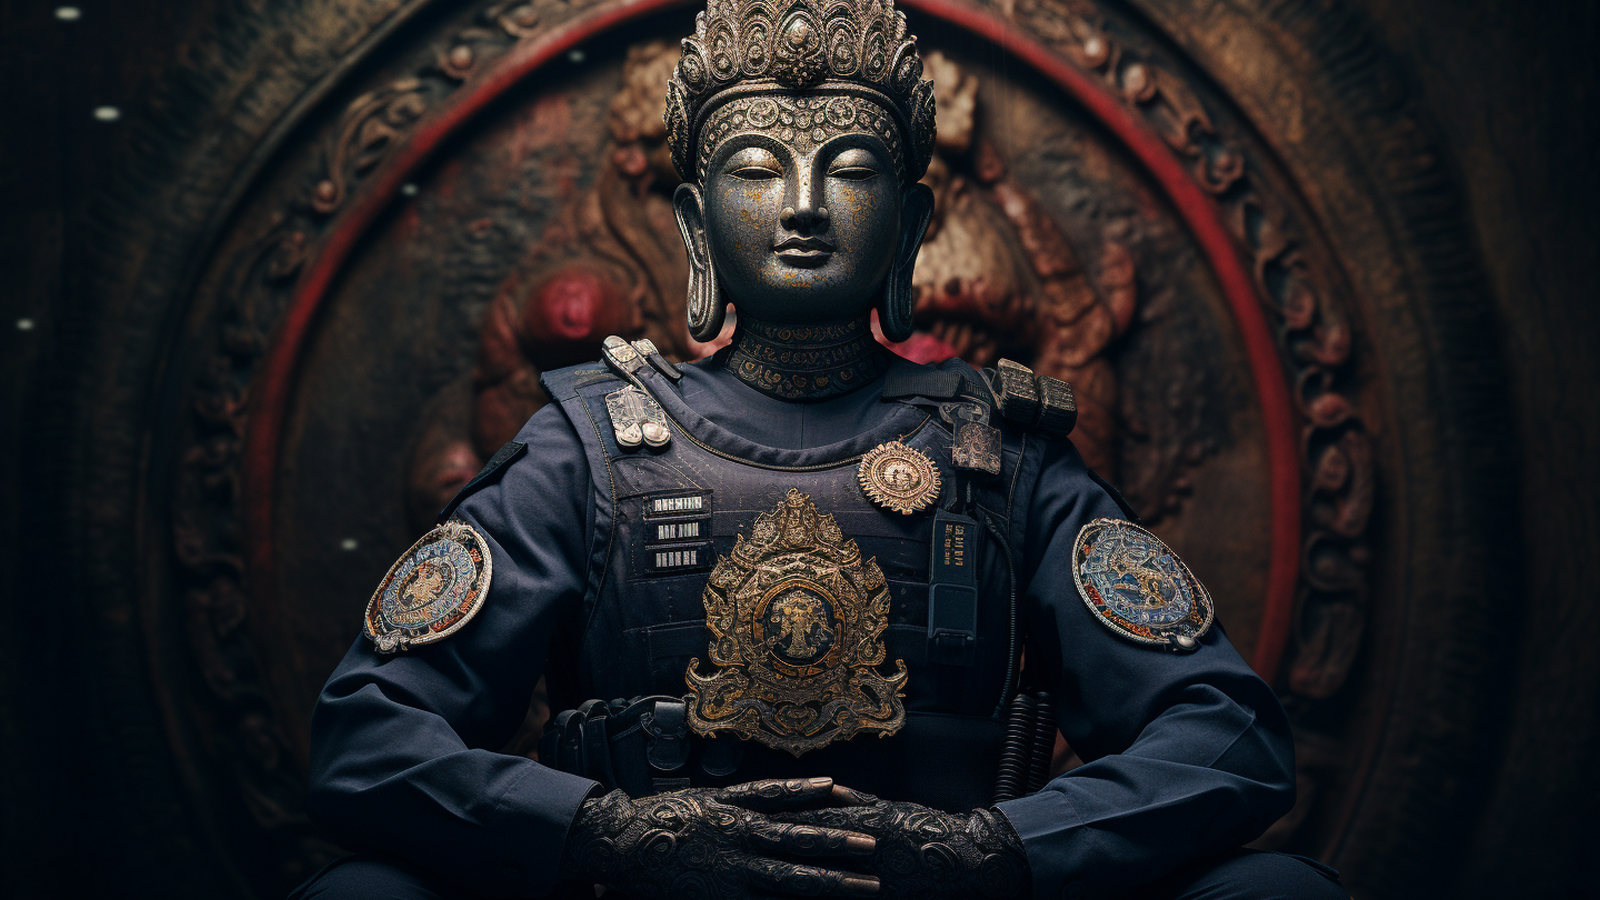 Buddhas in Blue: Enlightened Ways to Make Policing Work For Everyone